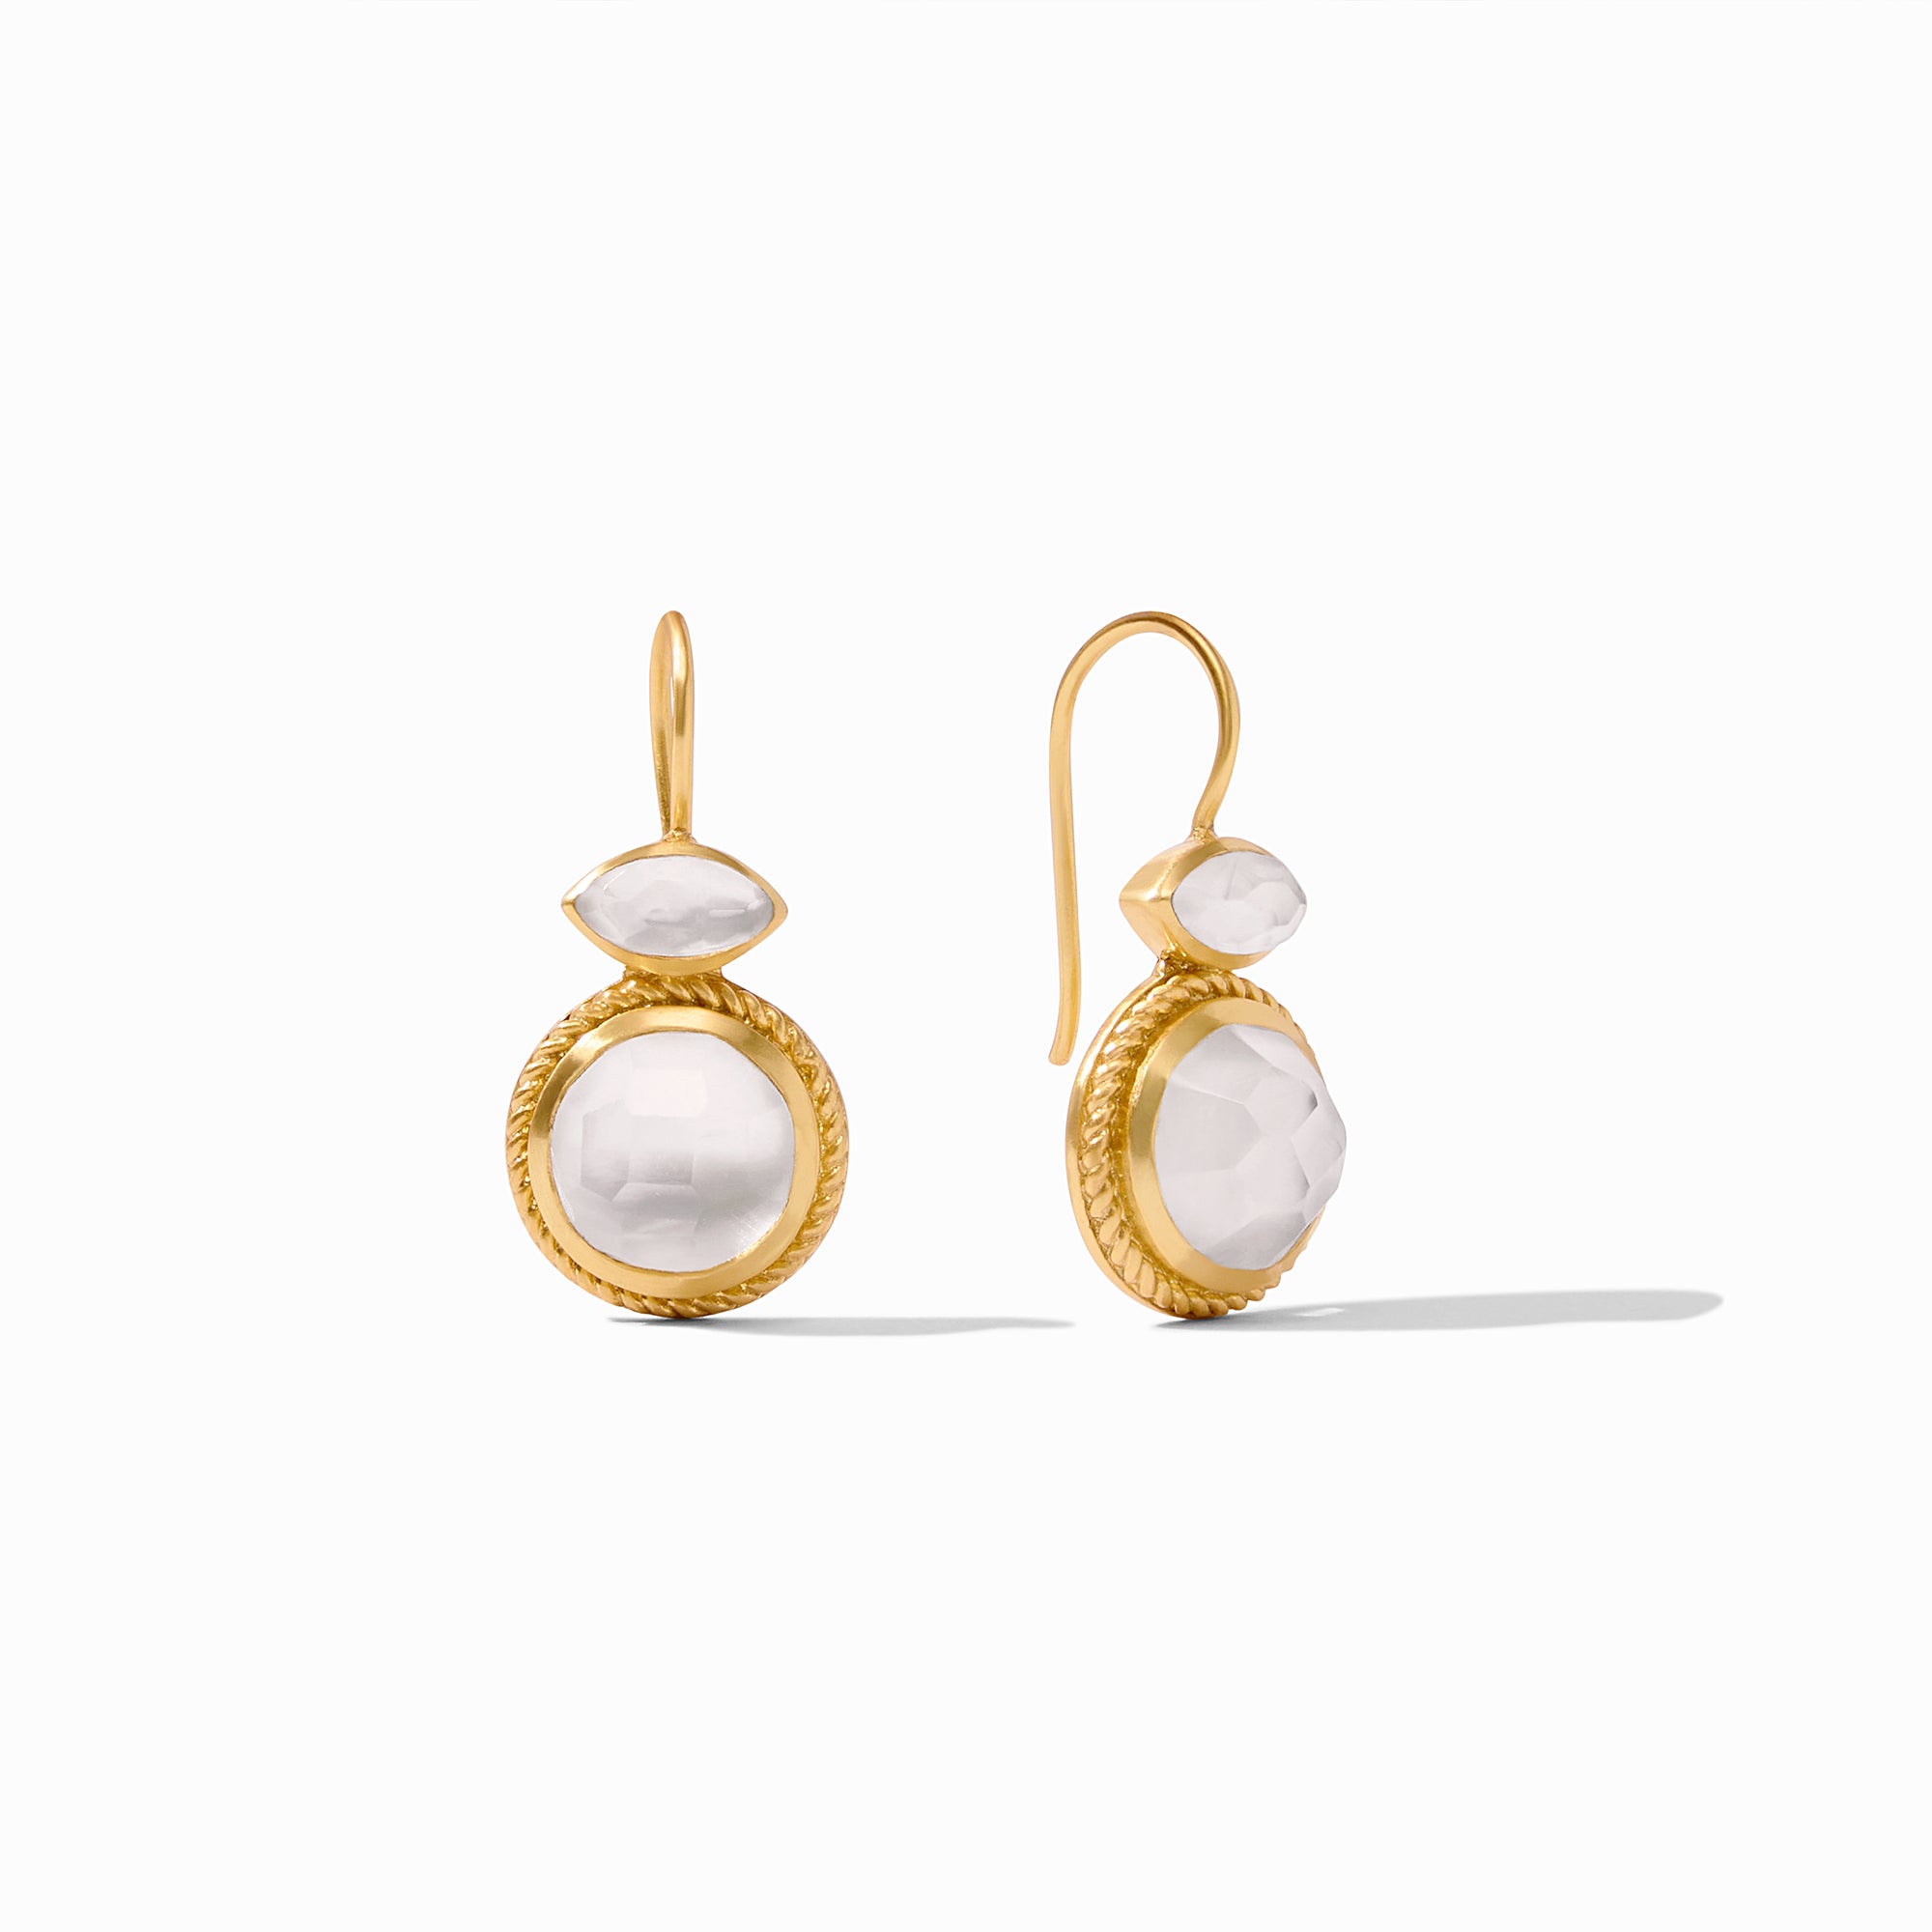 Julie Vos - Monaco Earring, Iridescent Clear Crystal